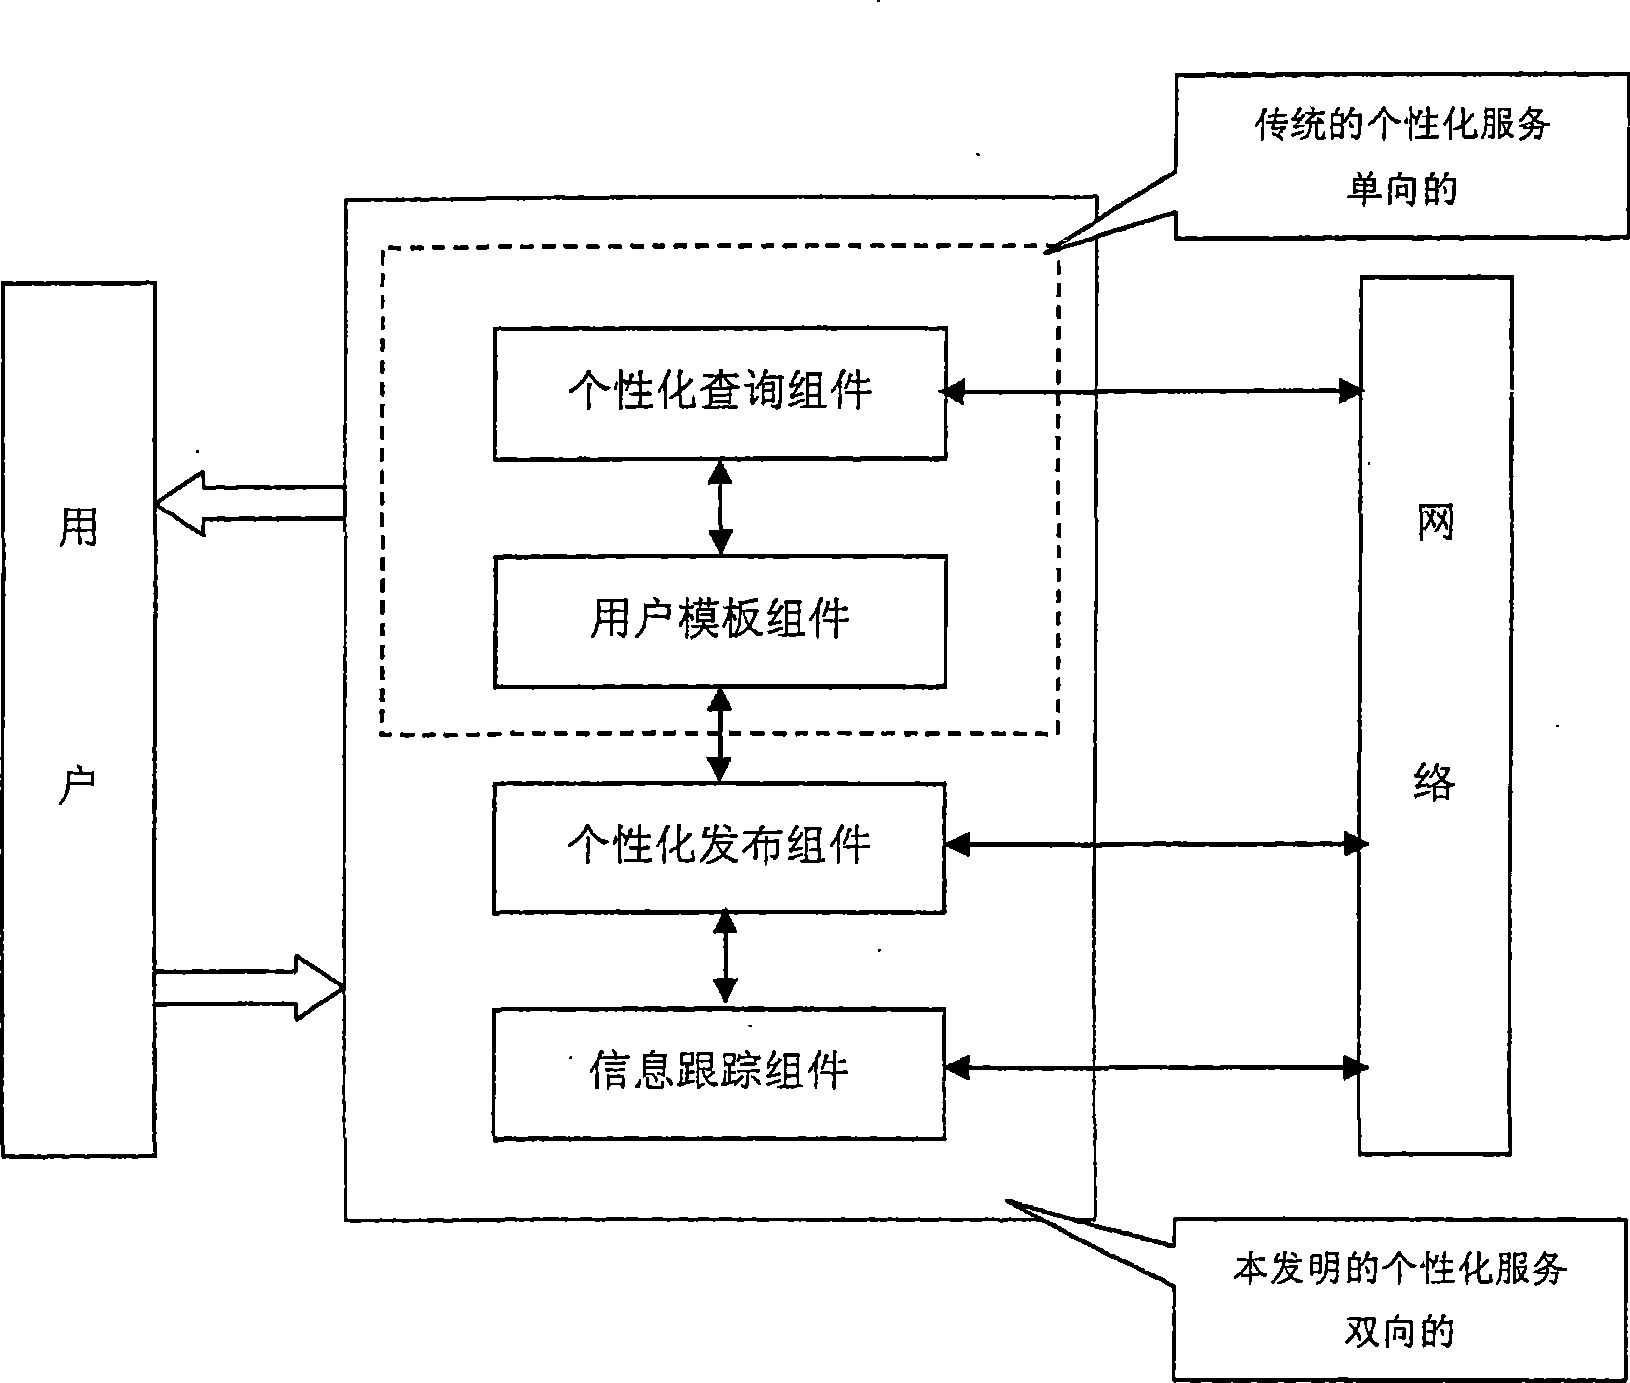 Information issuing system and information issuing method